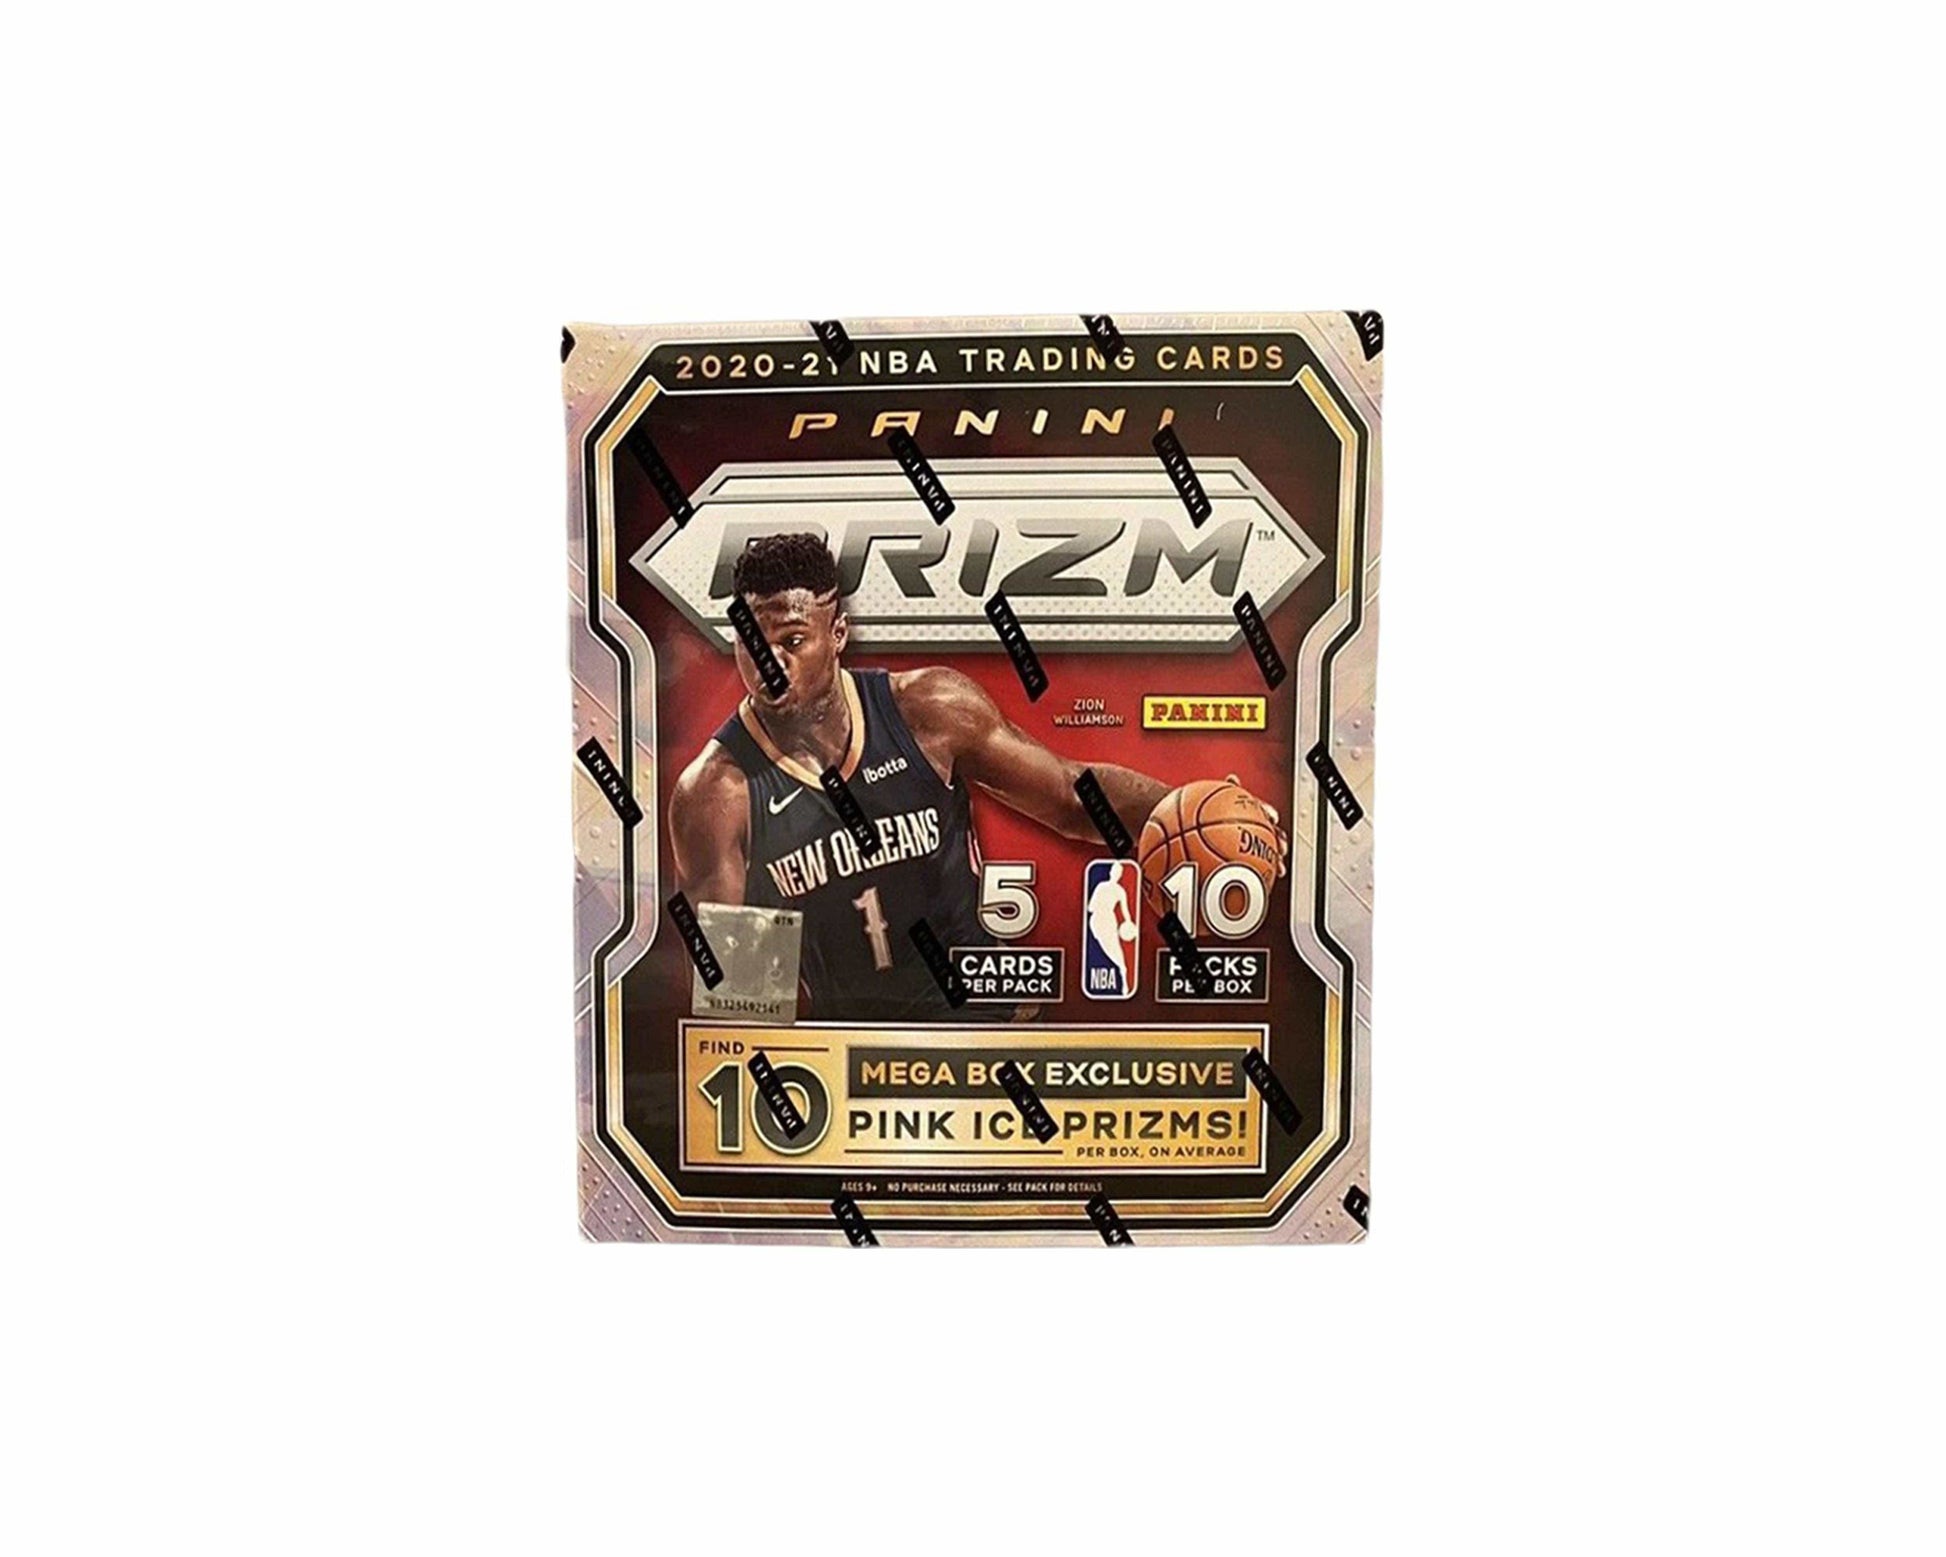 2020-21 Panini Prizm Basketball Mega Box Pink Ice Prizms - Only at www.BallersClubKickz.com - This 2020-21 Panini Prizm Basketball Mega Box comes with five cards per pack, and ten packs per box. On average, you will find ten exclusive Pink Ice Prizm parallels per box.